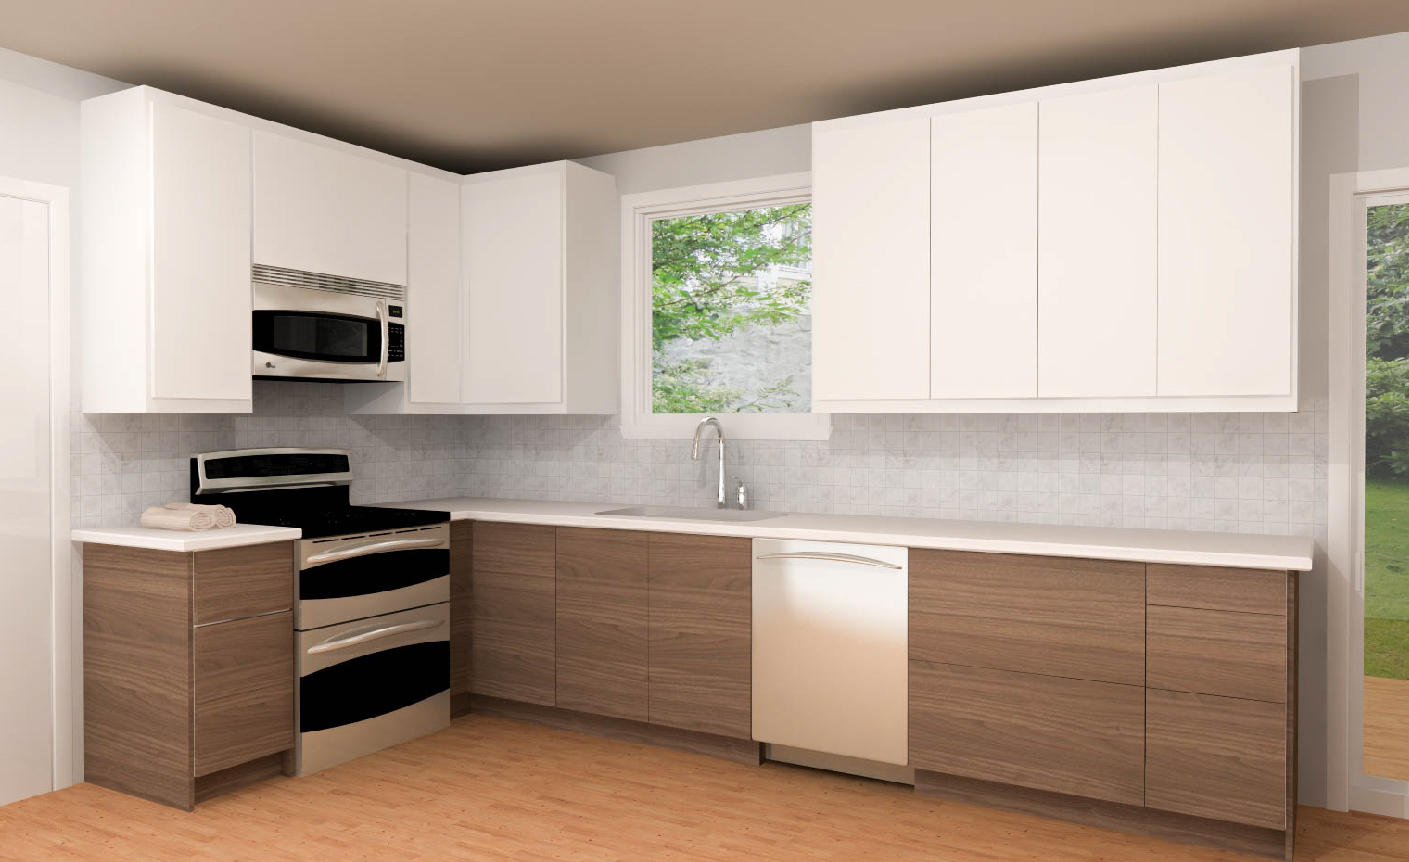 Three Ikea Kitchens Cabinet Designs, How Much Will An Ikea Kitchen Cost